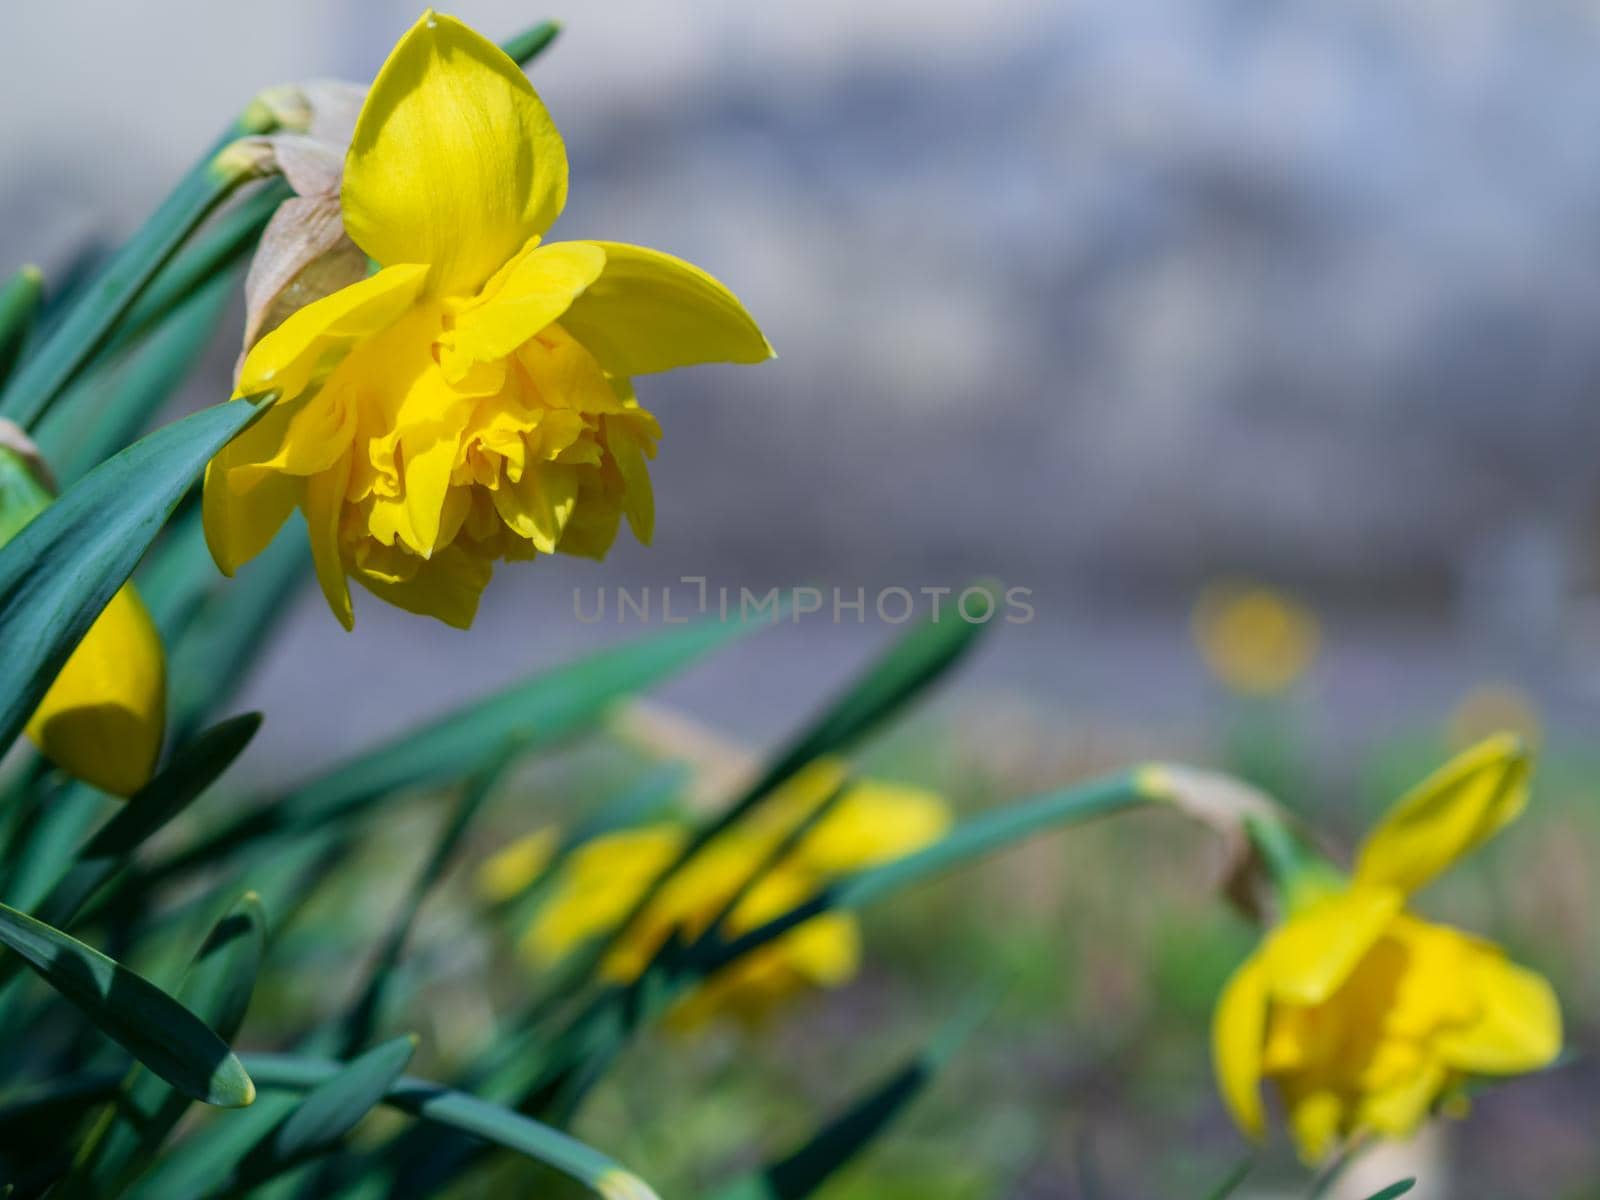 Amazing Yellow Daffodils flower field in the morning sunlight. The perfect image for spring background, flower landscape.